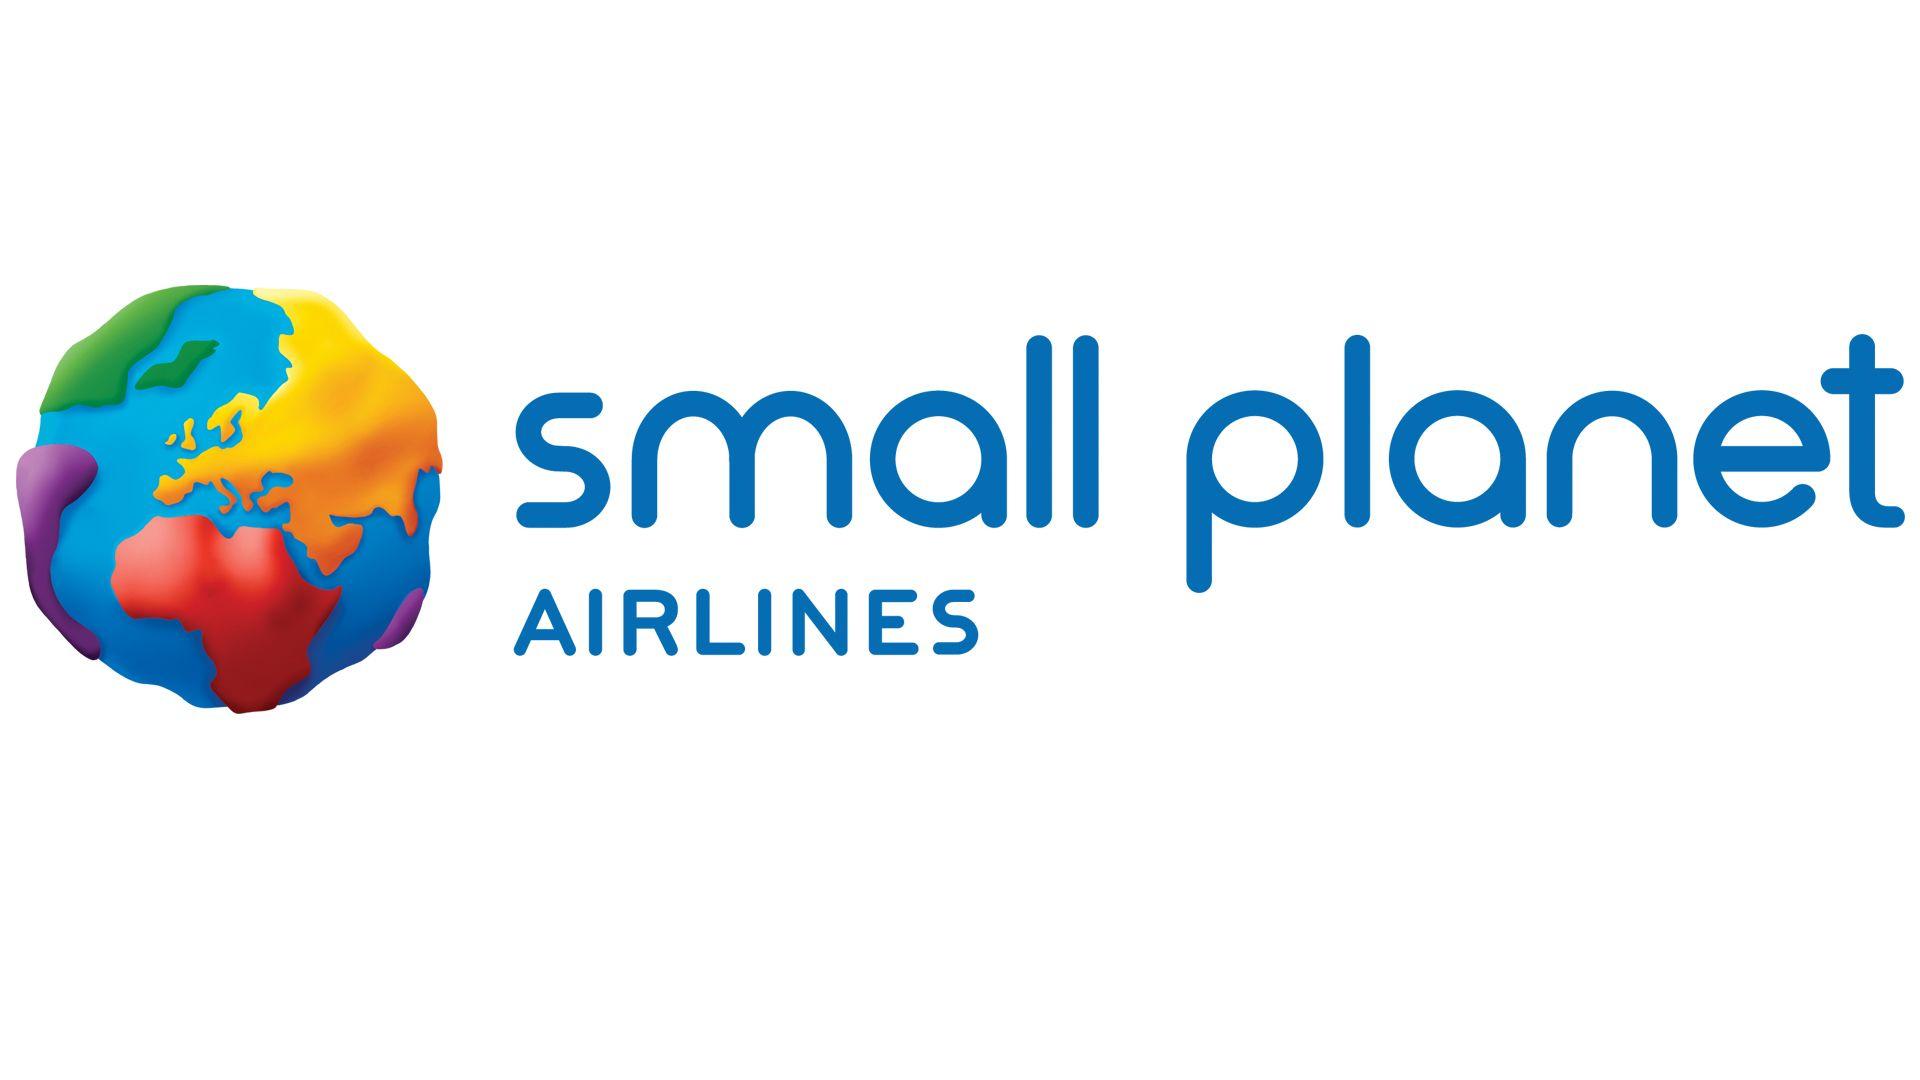 Small American Airlines Logo - Schiphol | Small Planet Airlines (5P)